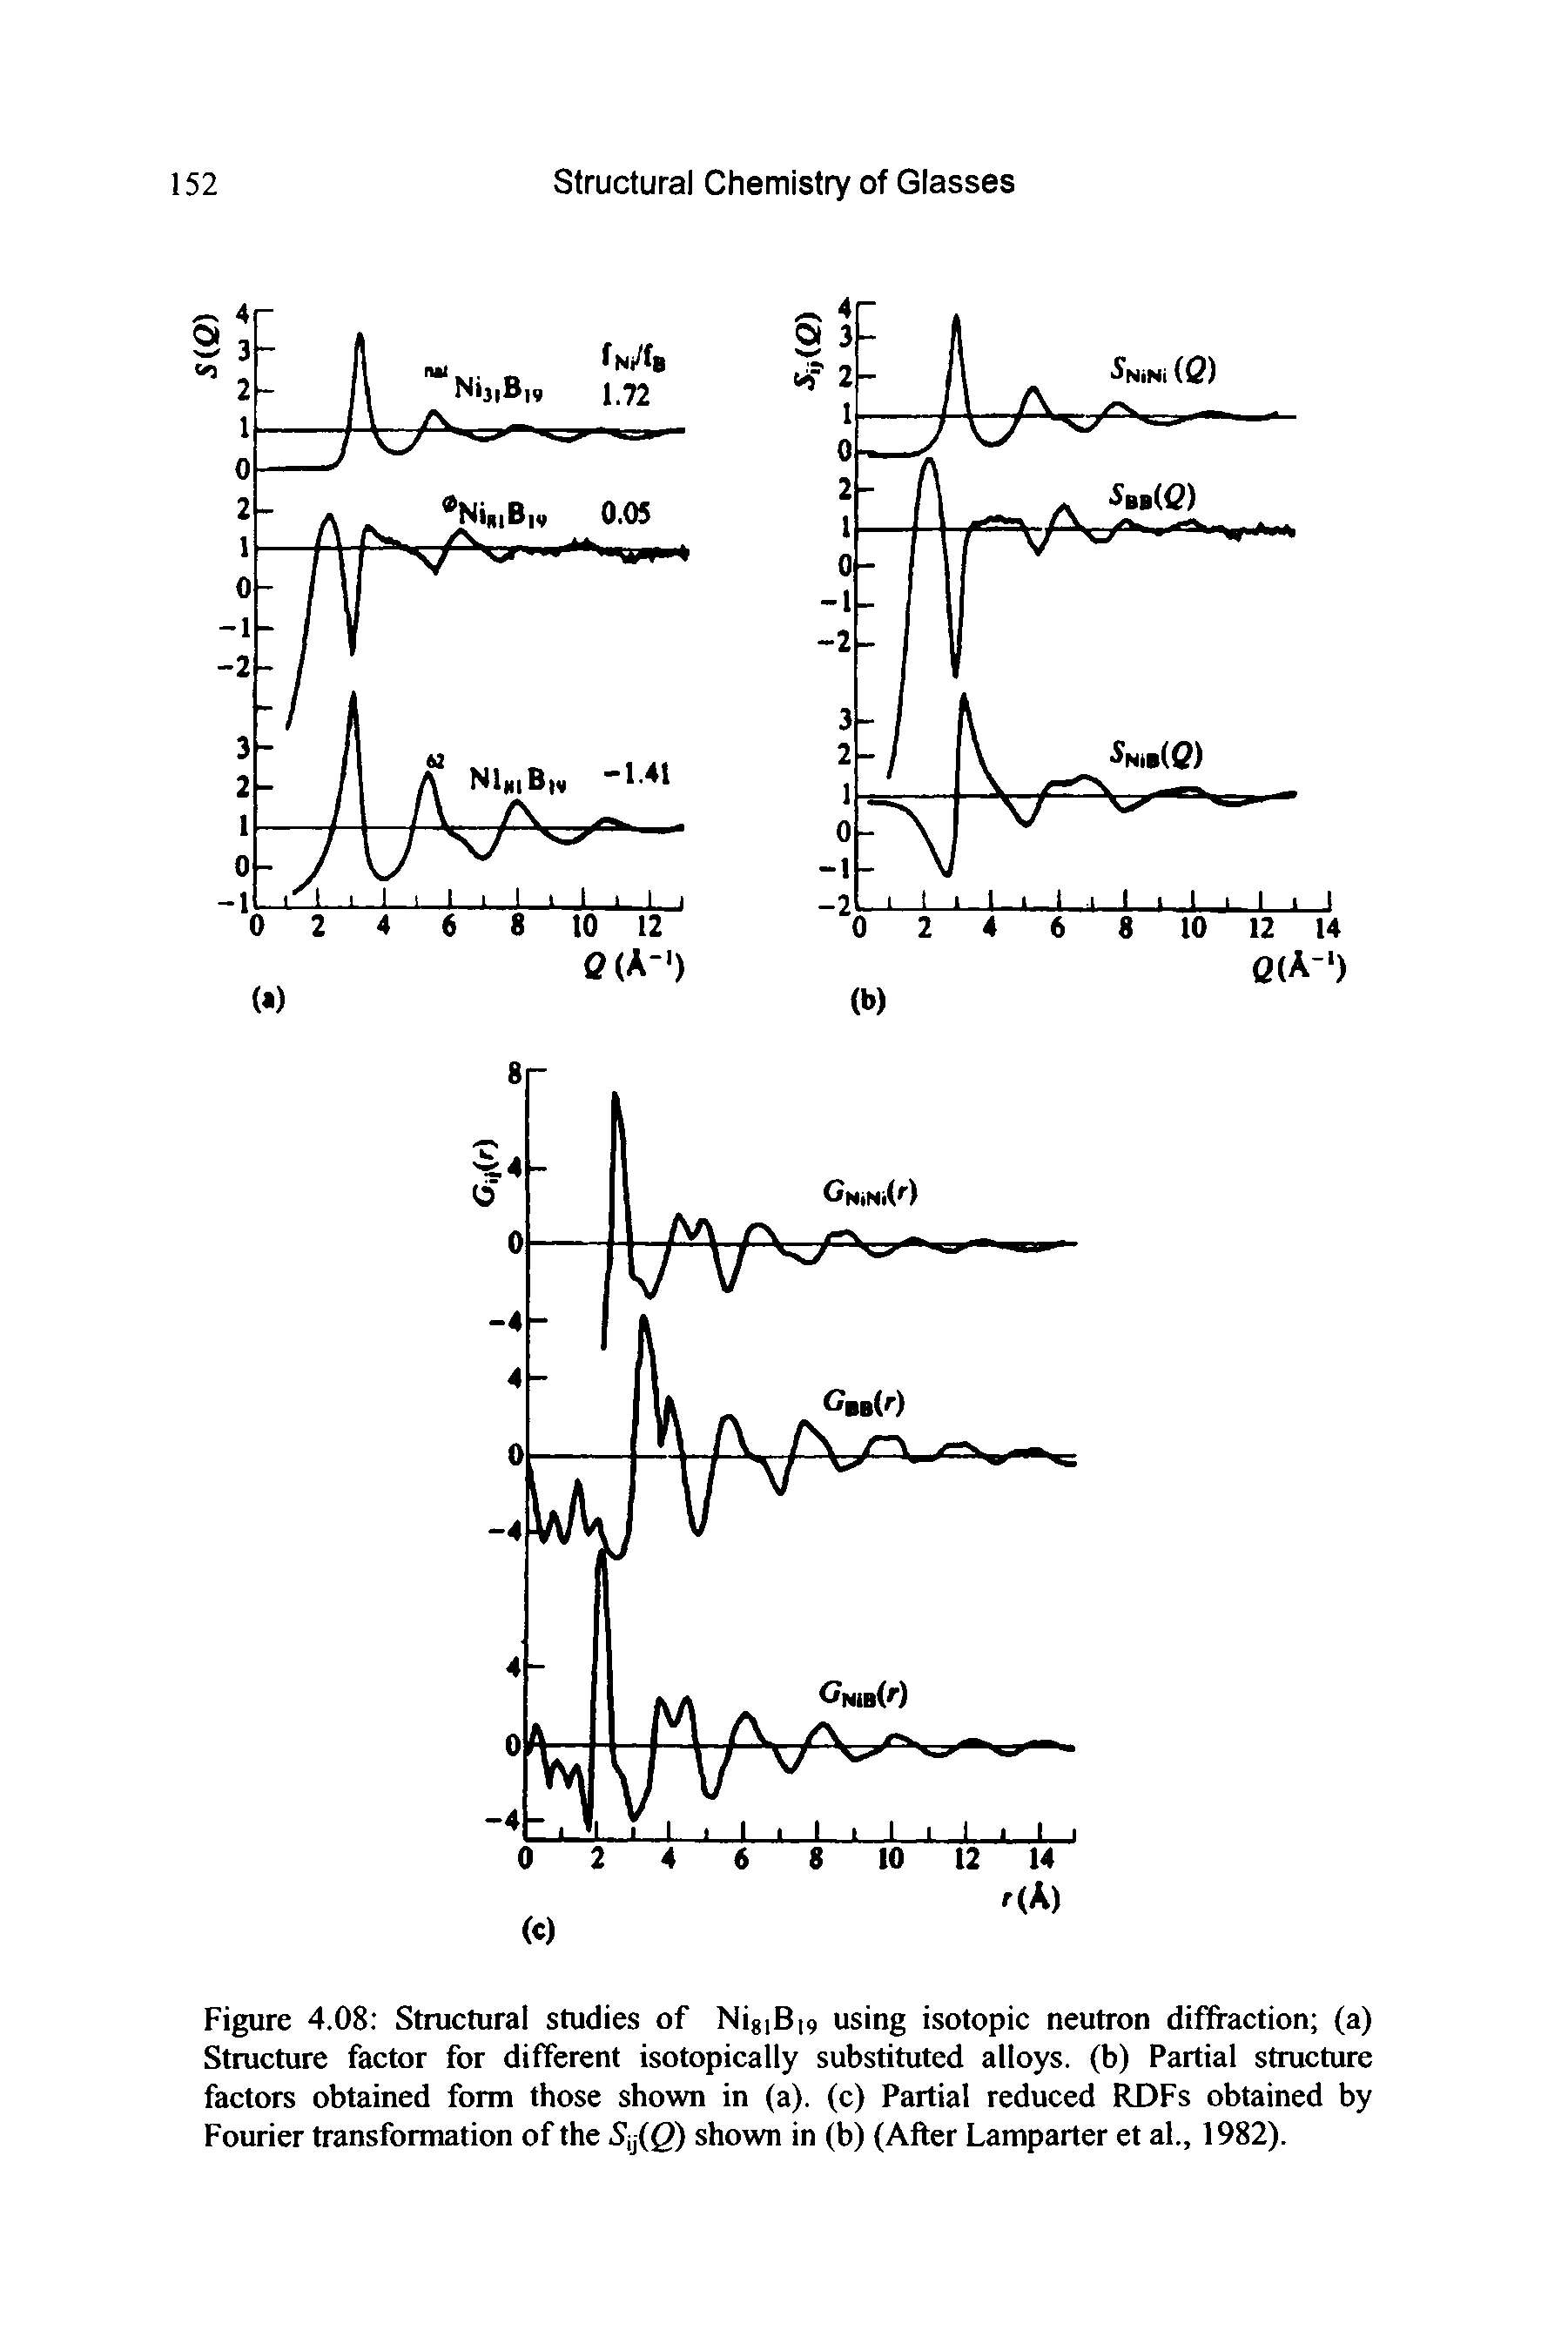 Figure 4.08 Structural studies of NigiB 9 using isotopic neutron diffraction (a) Structure factor for different isotopically substituted alloys, (b) Partial structure factors obtained form those shown in (a), (c) Partial reduced RDFs obtained by Fourier transformation of the 5ij(0 shown in (b) (After Lamparter et al., 1982).